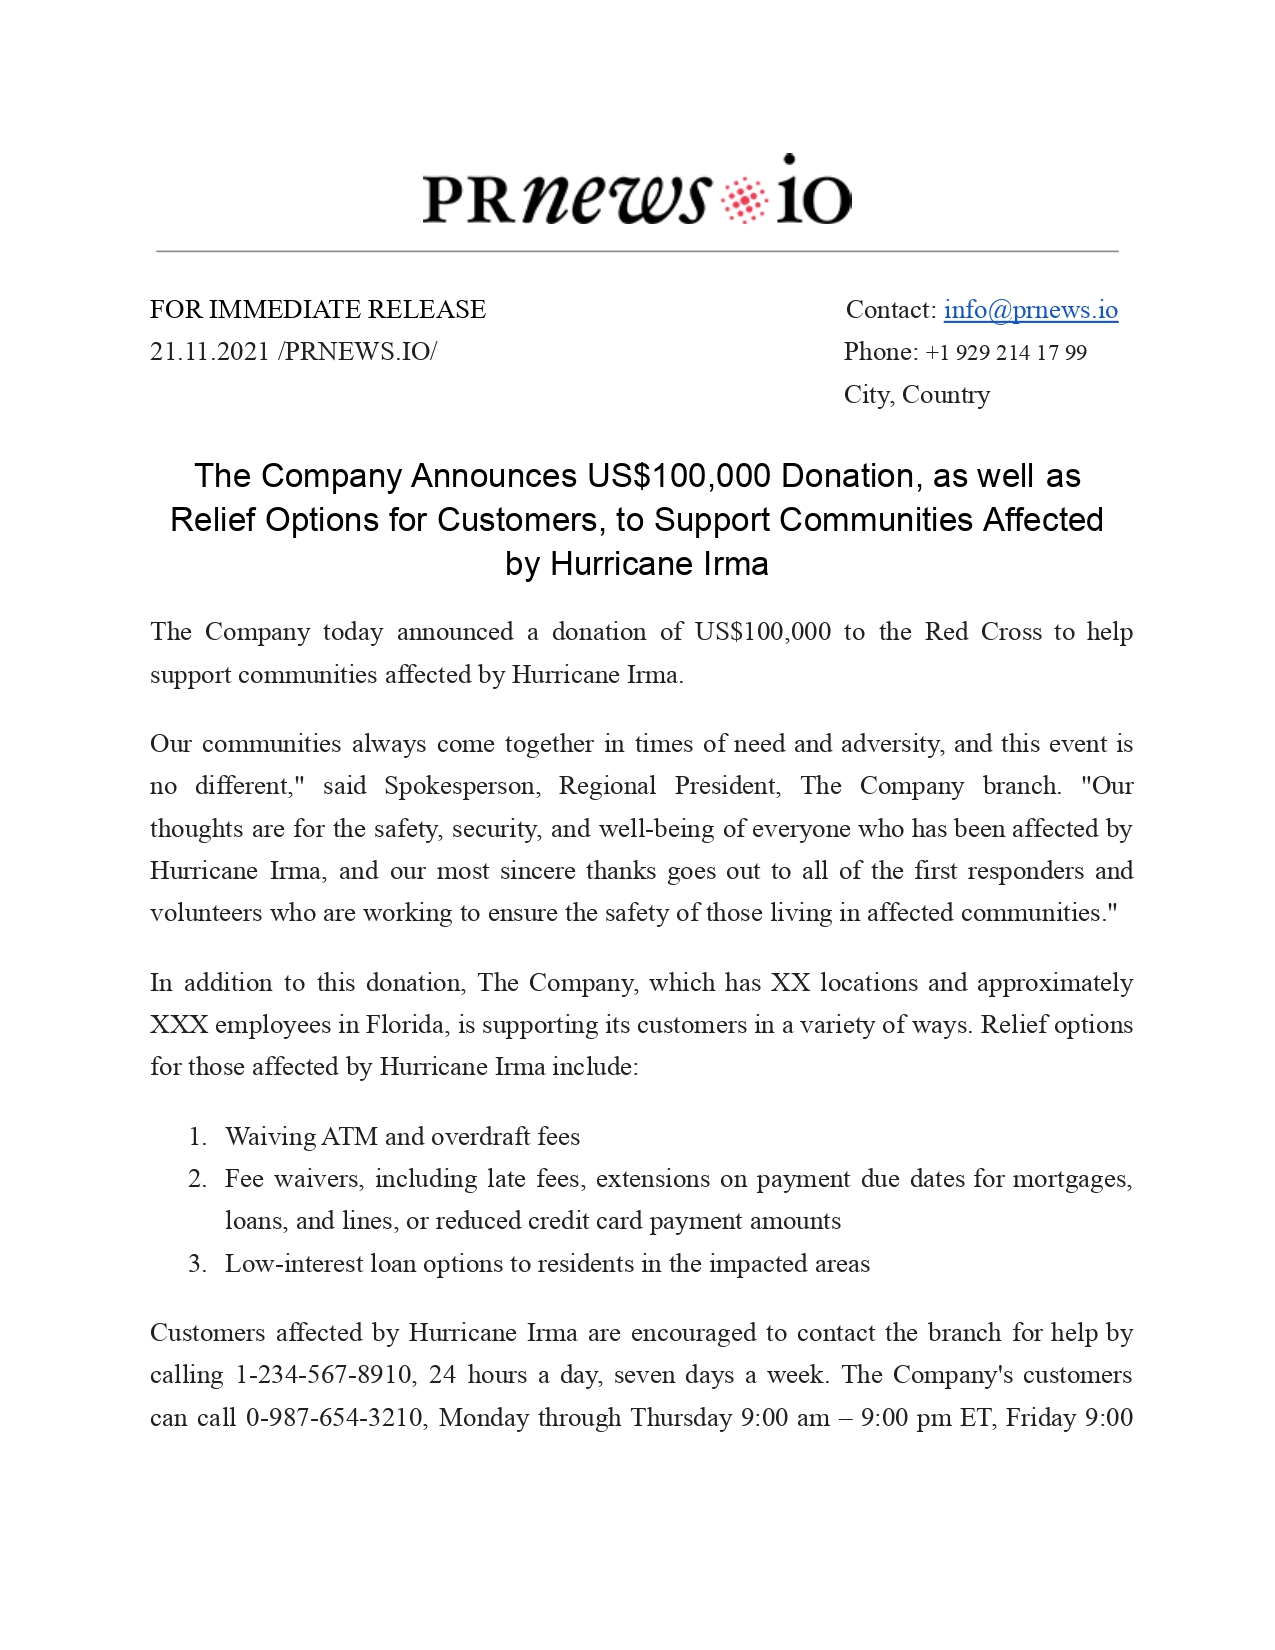 Donation Press Release Example